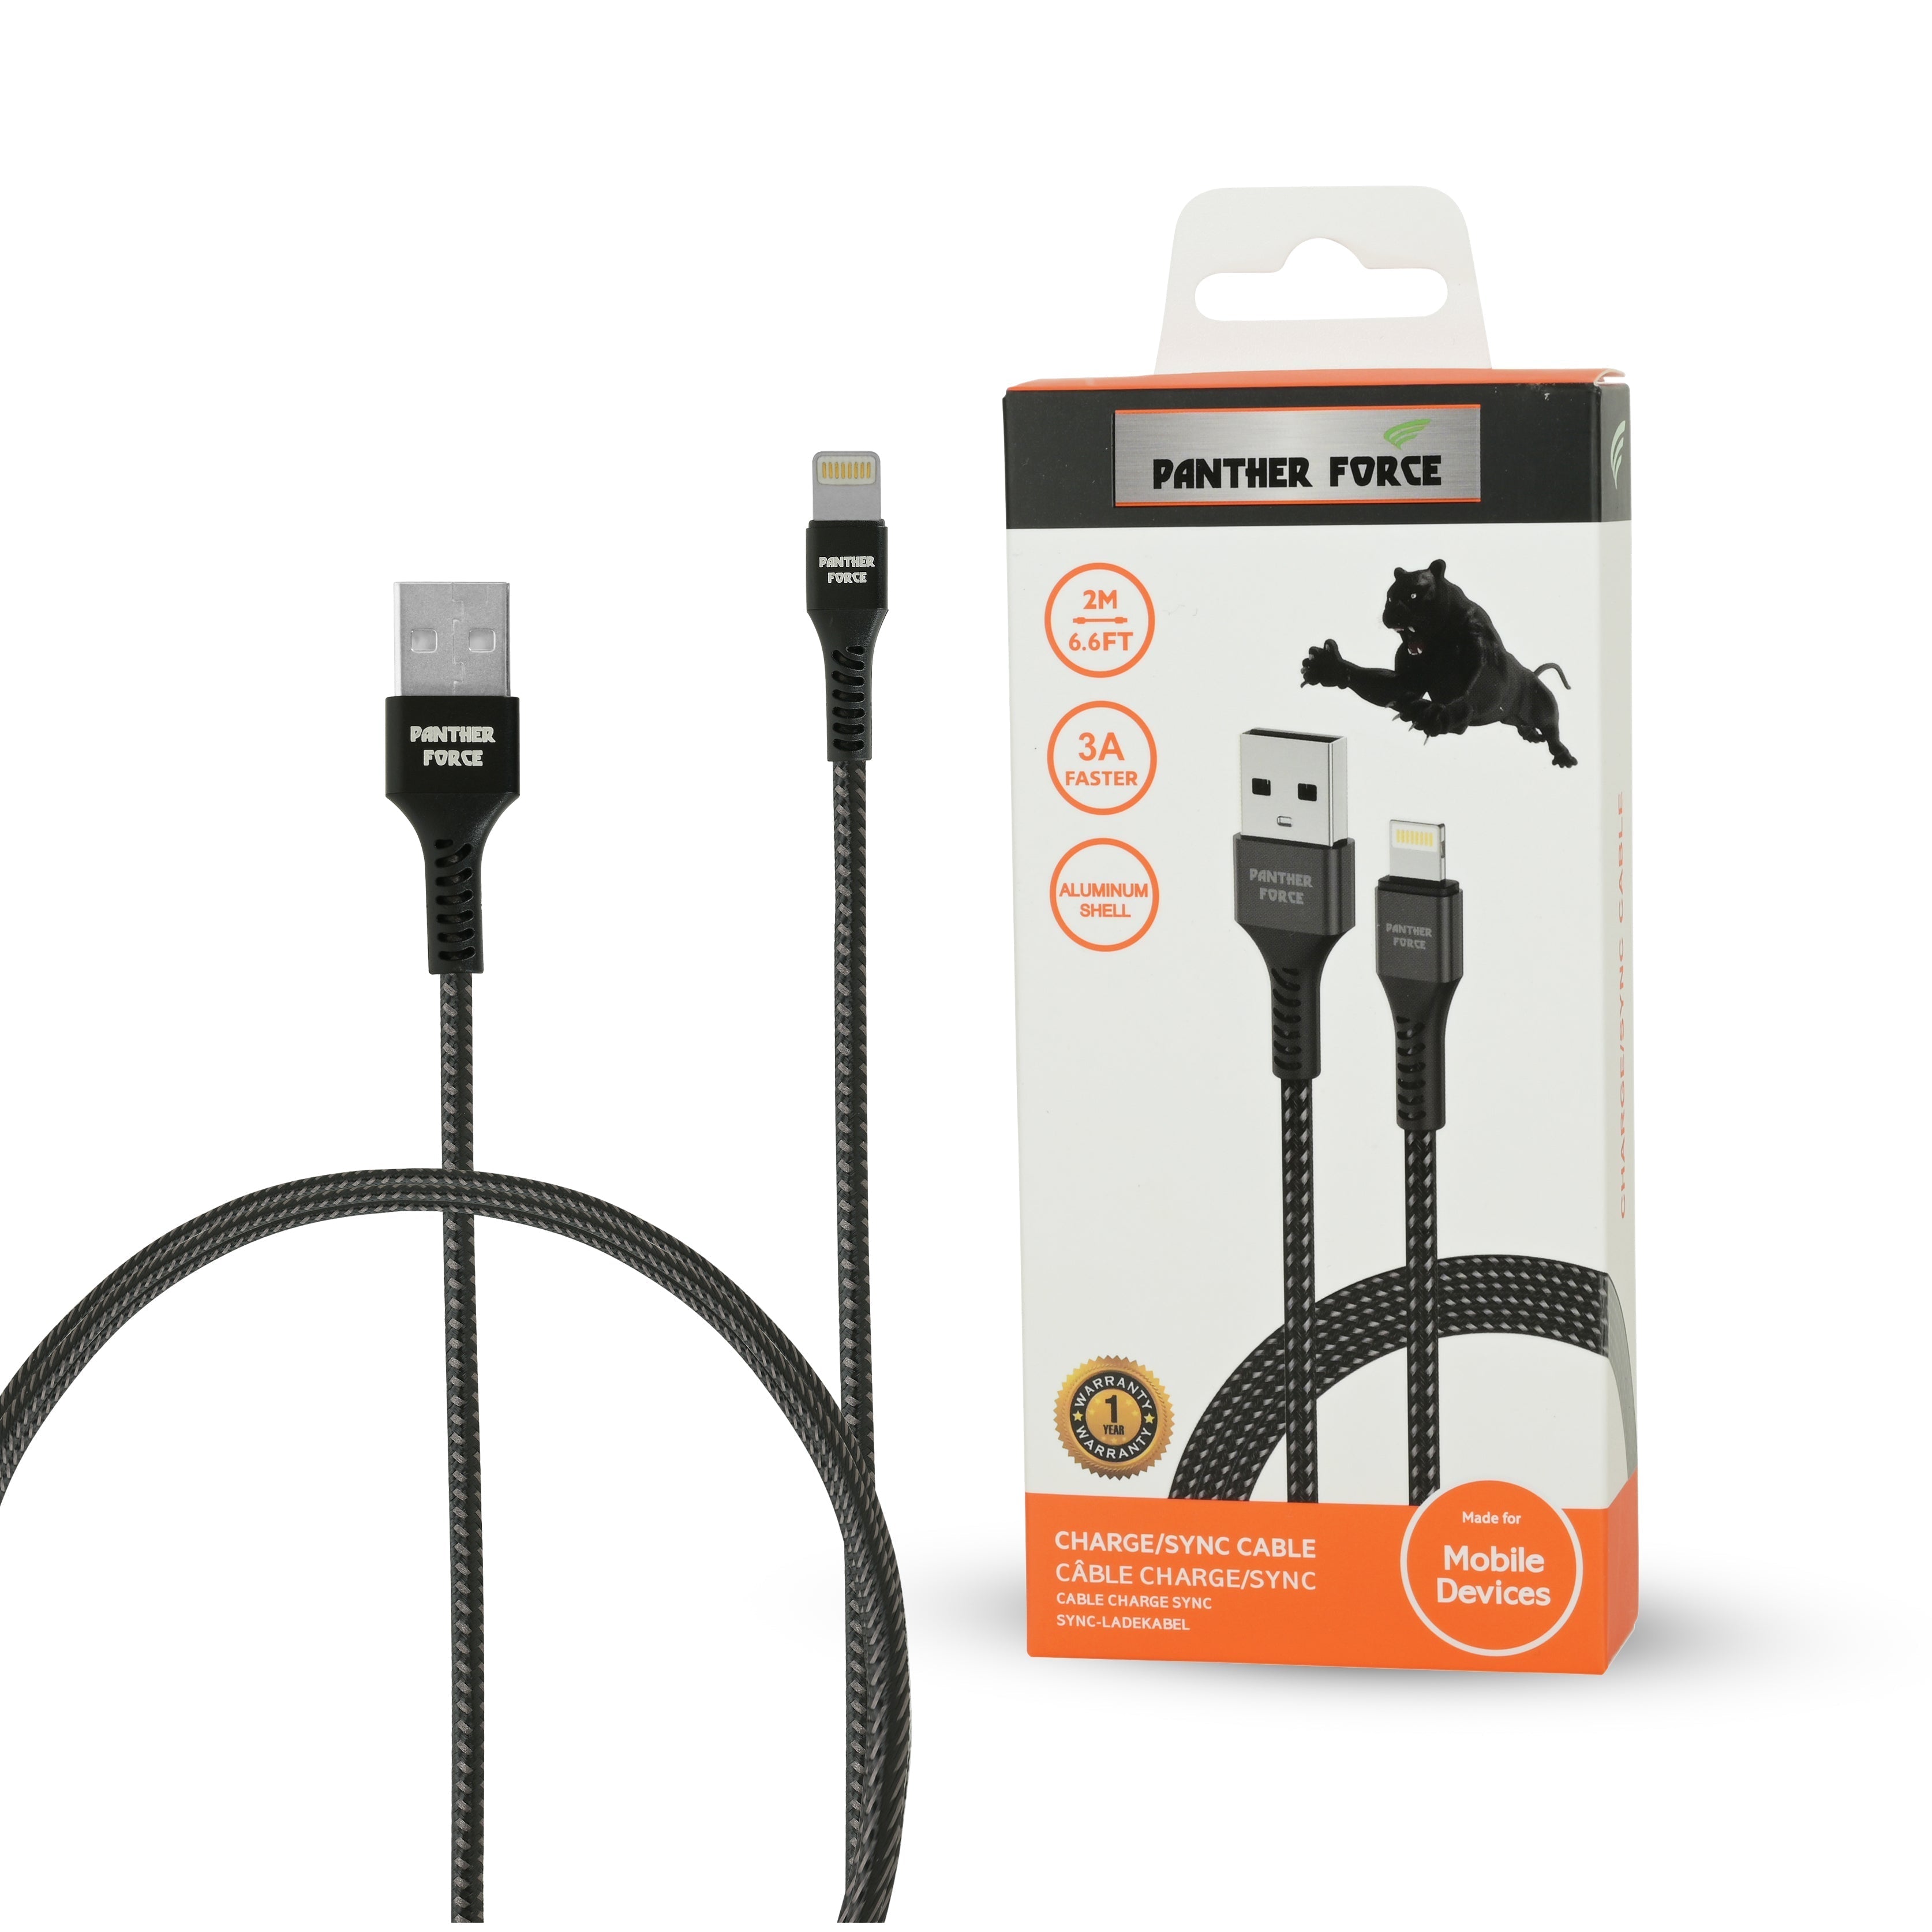 2M Apple Lightning Charge/Sync Cable-3A Faster- Aluminum shell